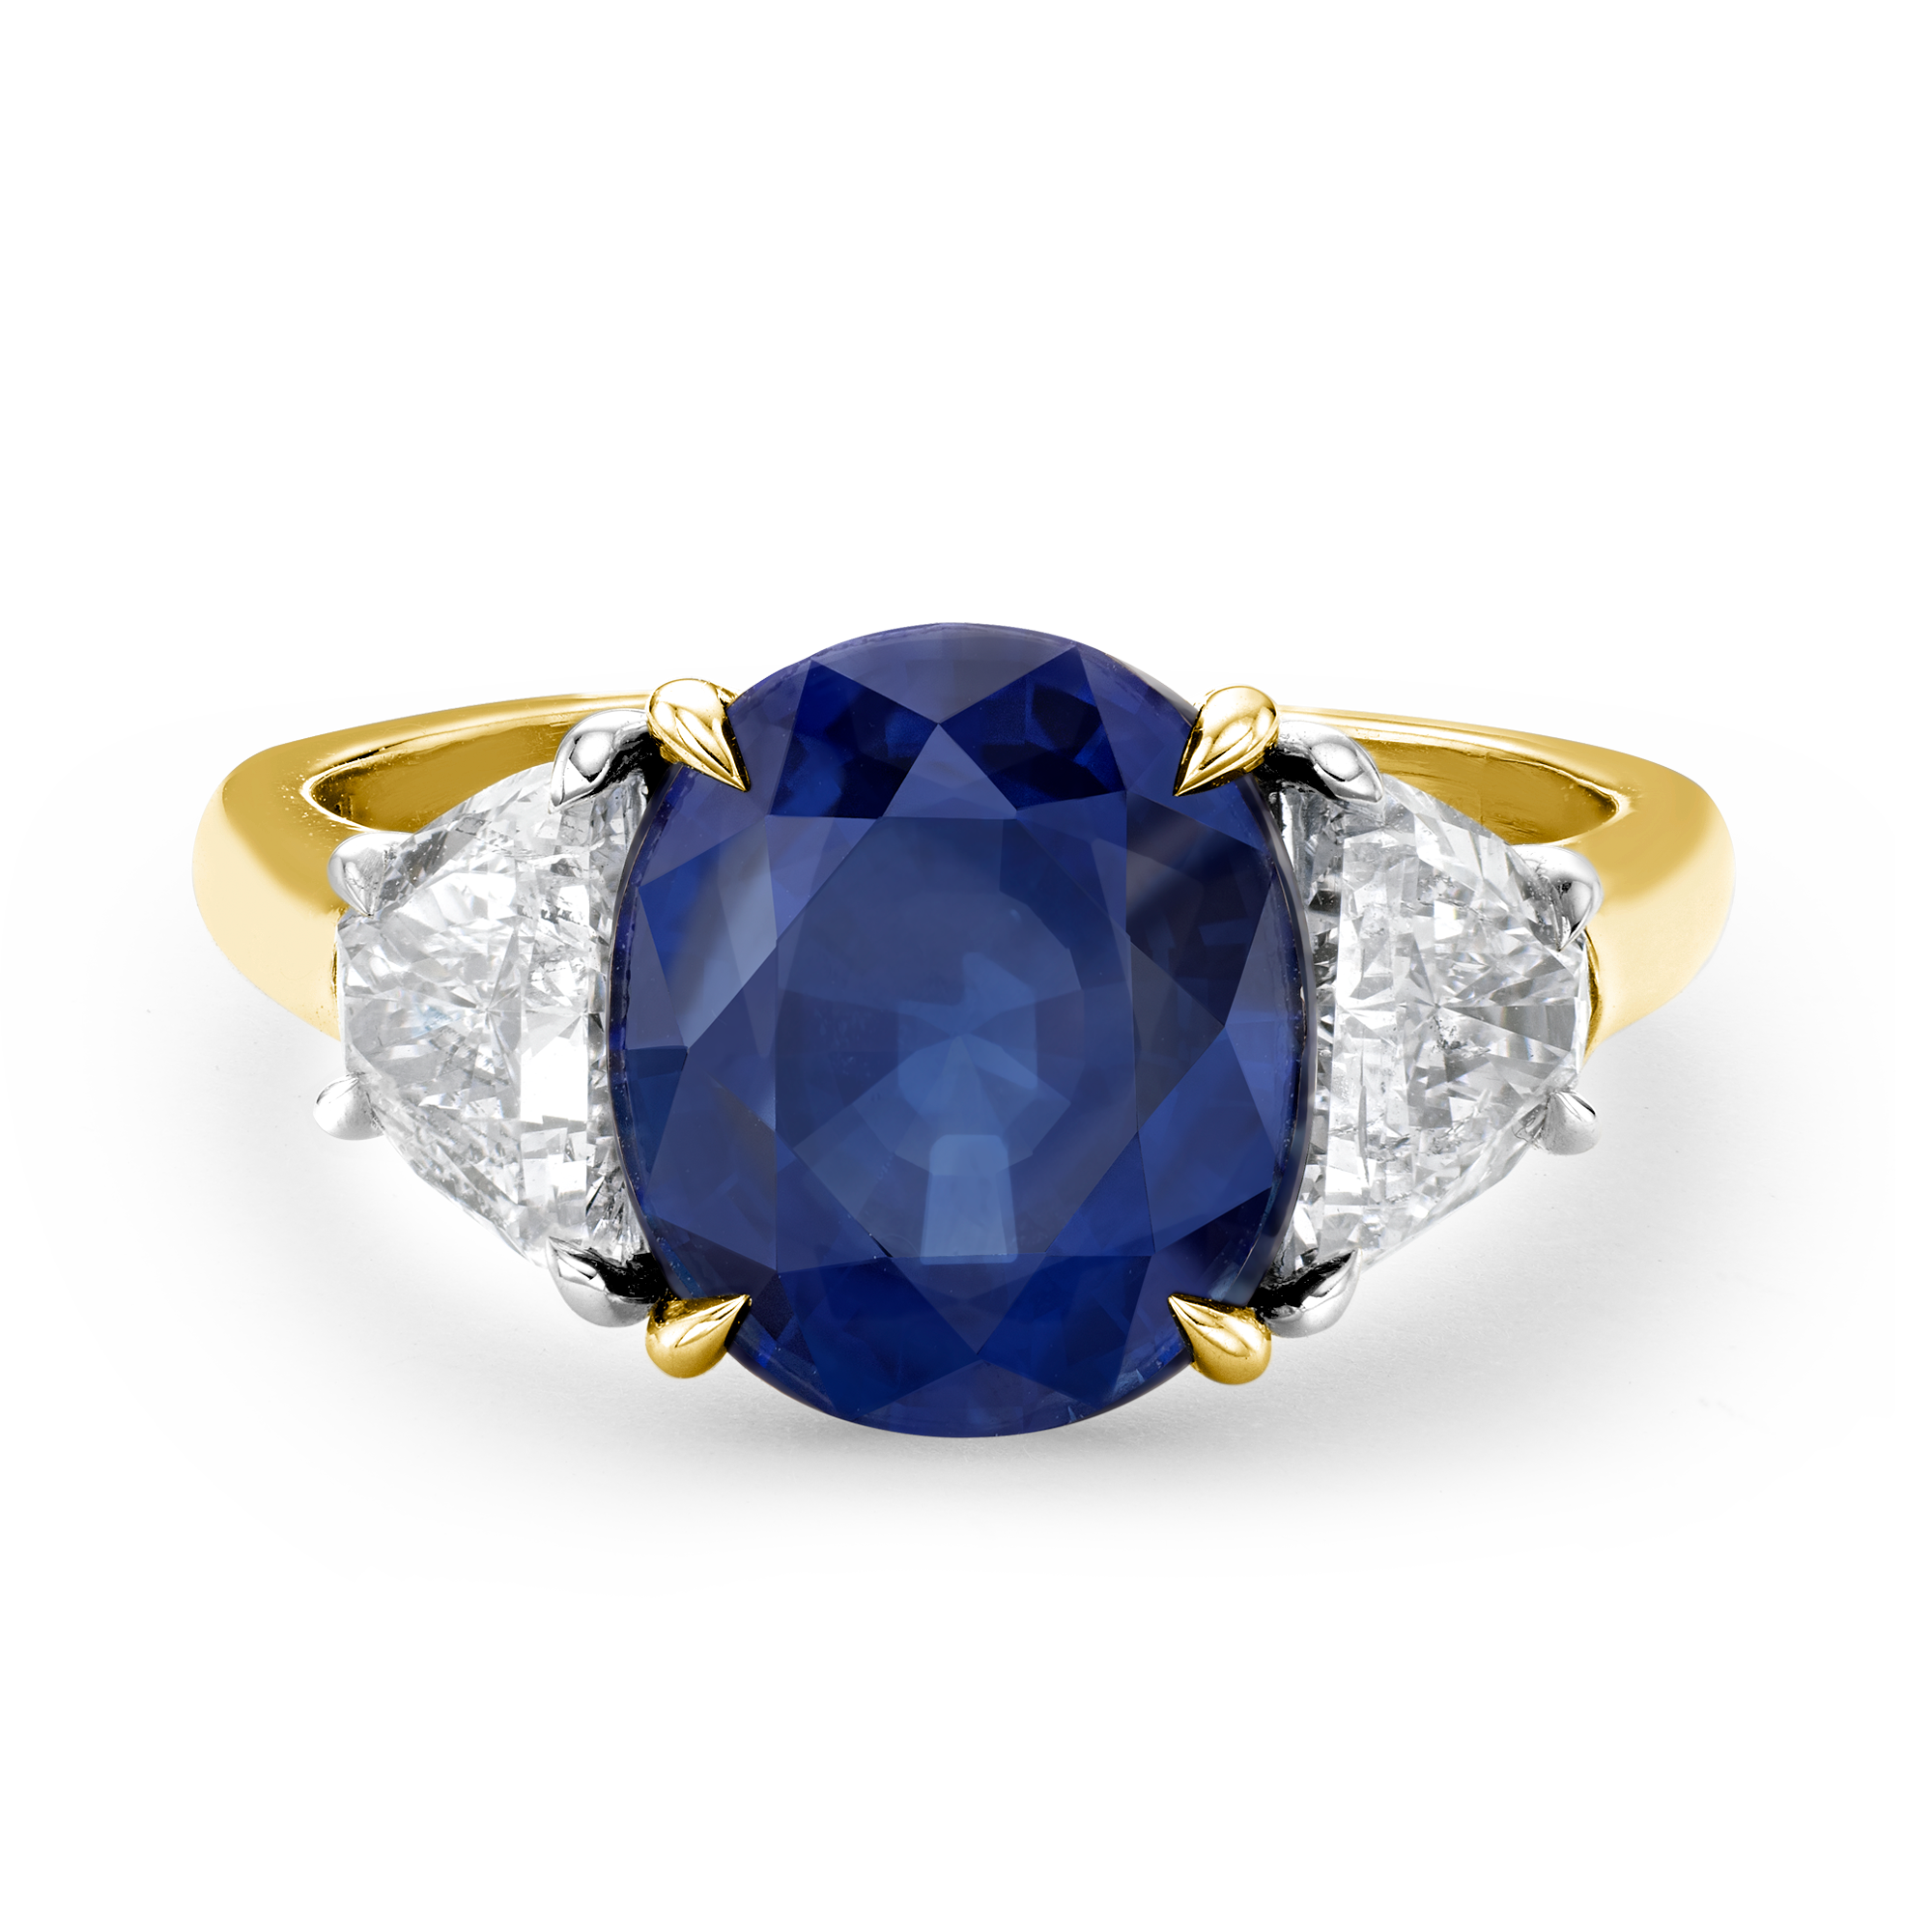 Blue Sapphire and Half Moon shaped Diamond Ring Oval Cut, Claw Set_2